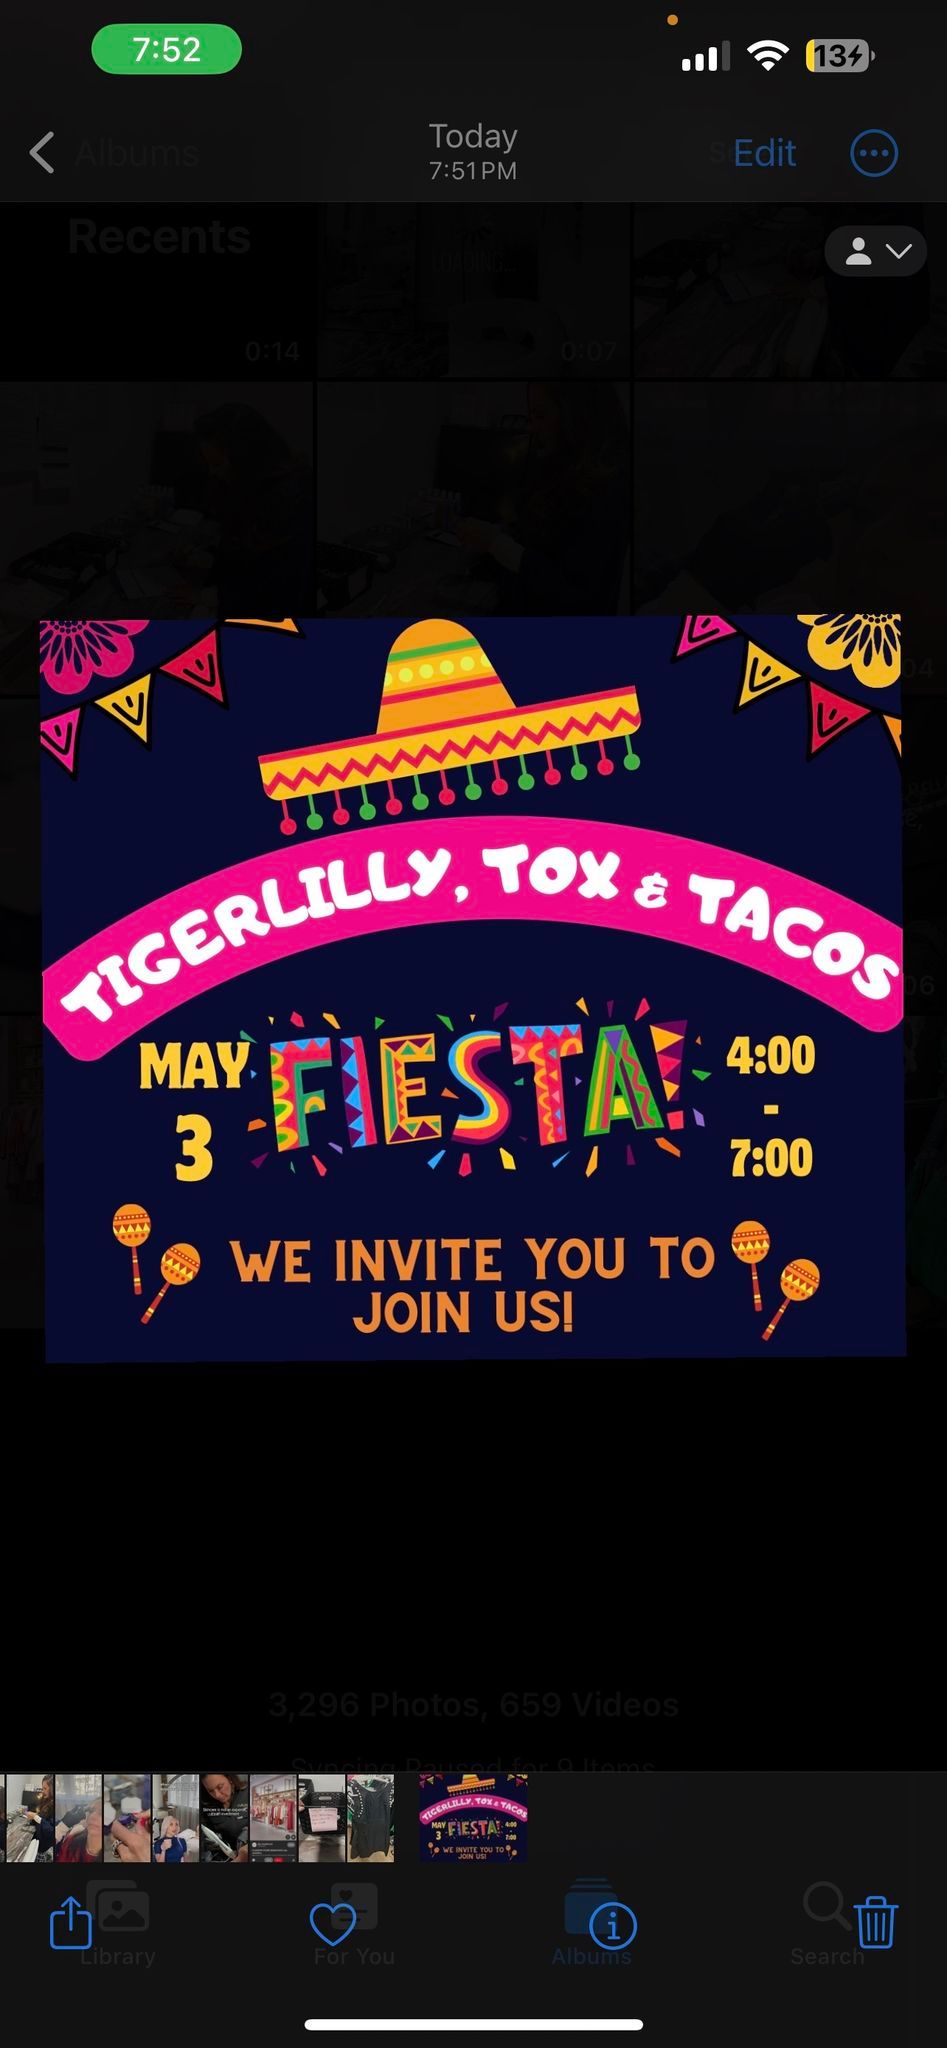 TigerLilly, Tox & Tacos 